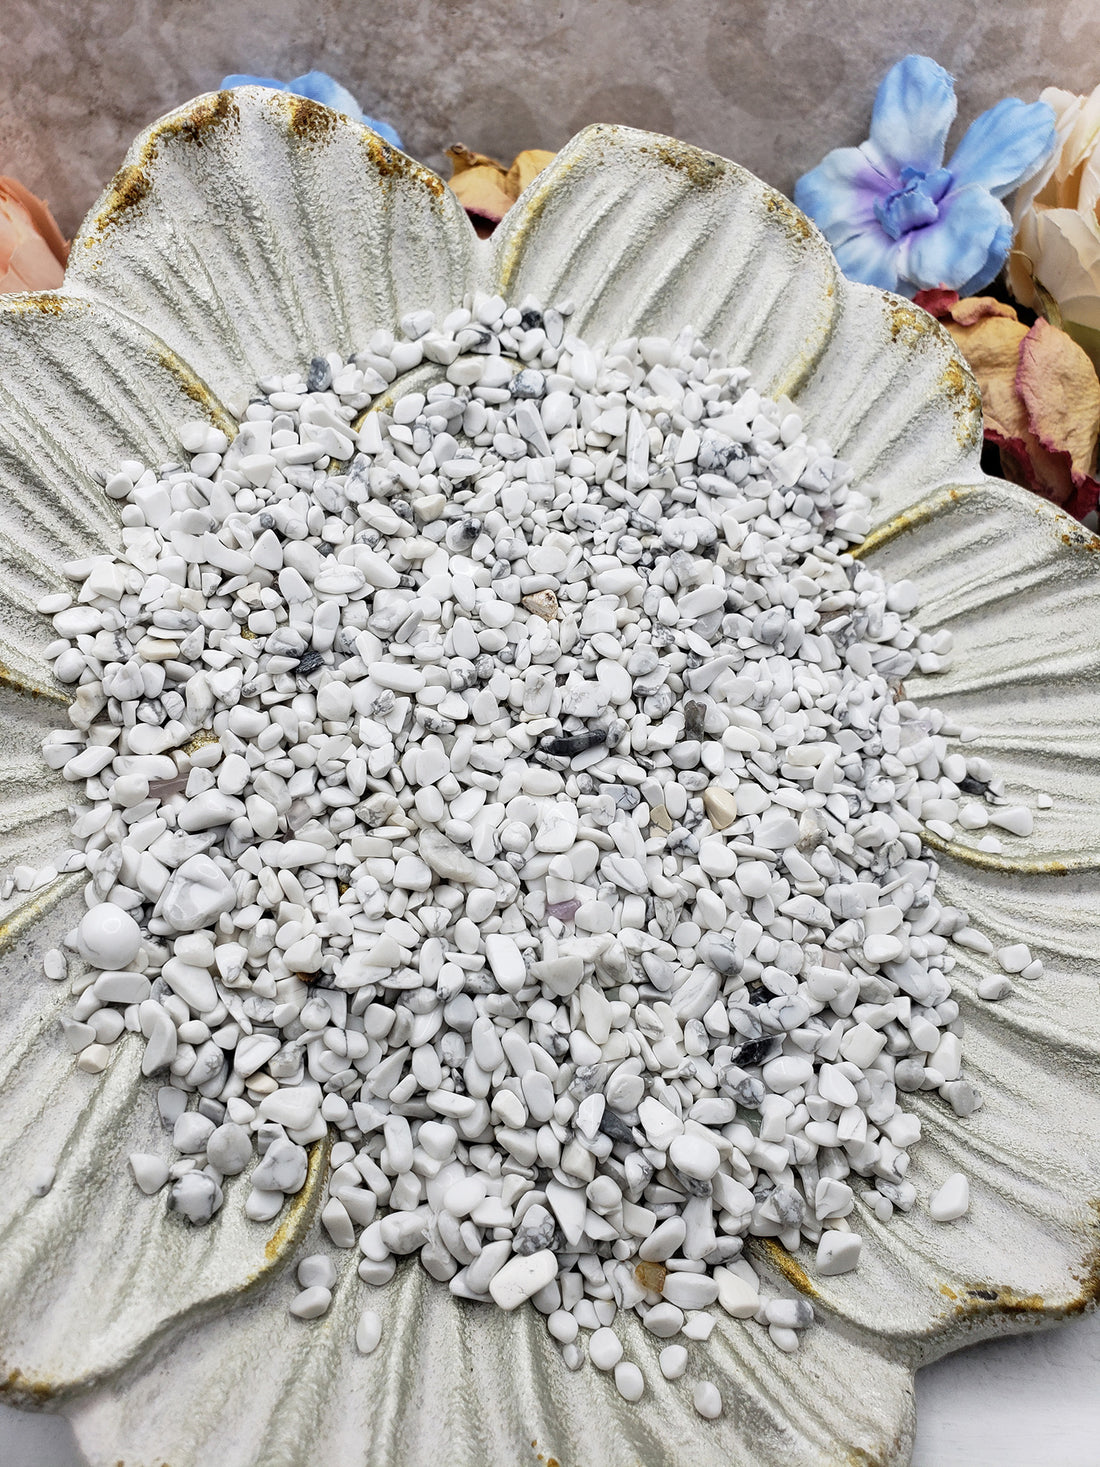 Seven ounces of crystal chips  on floral display dish